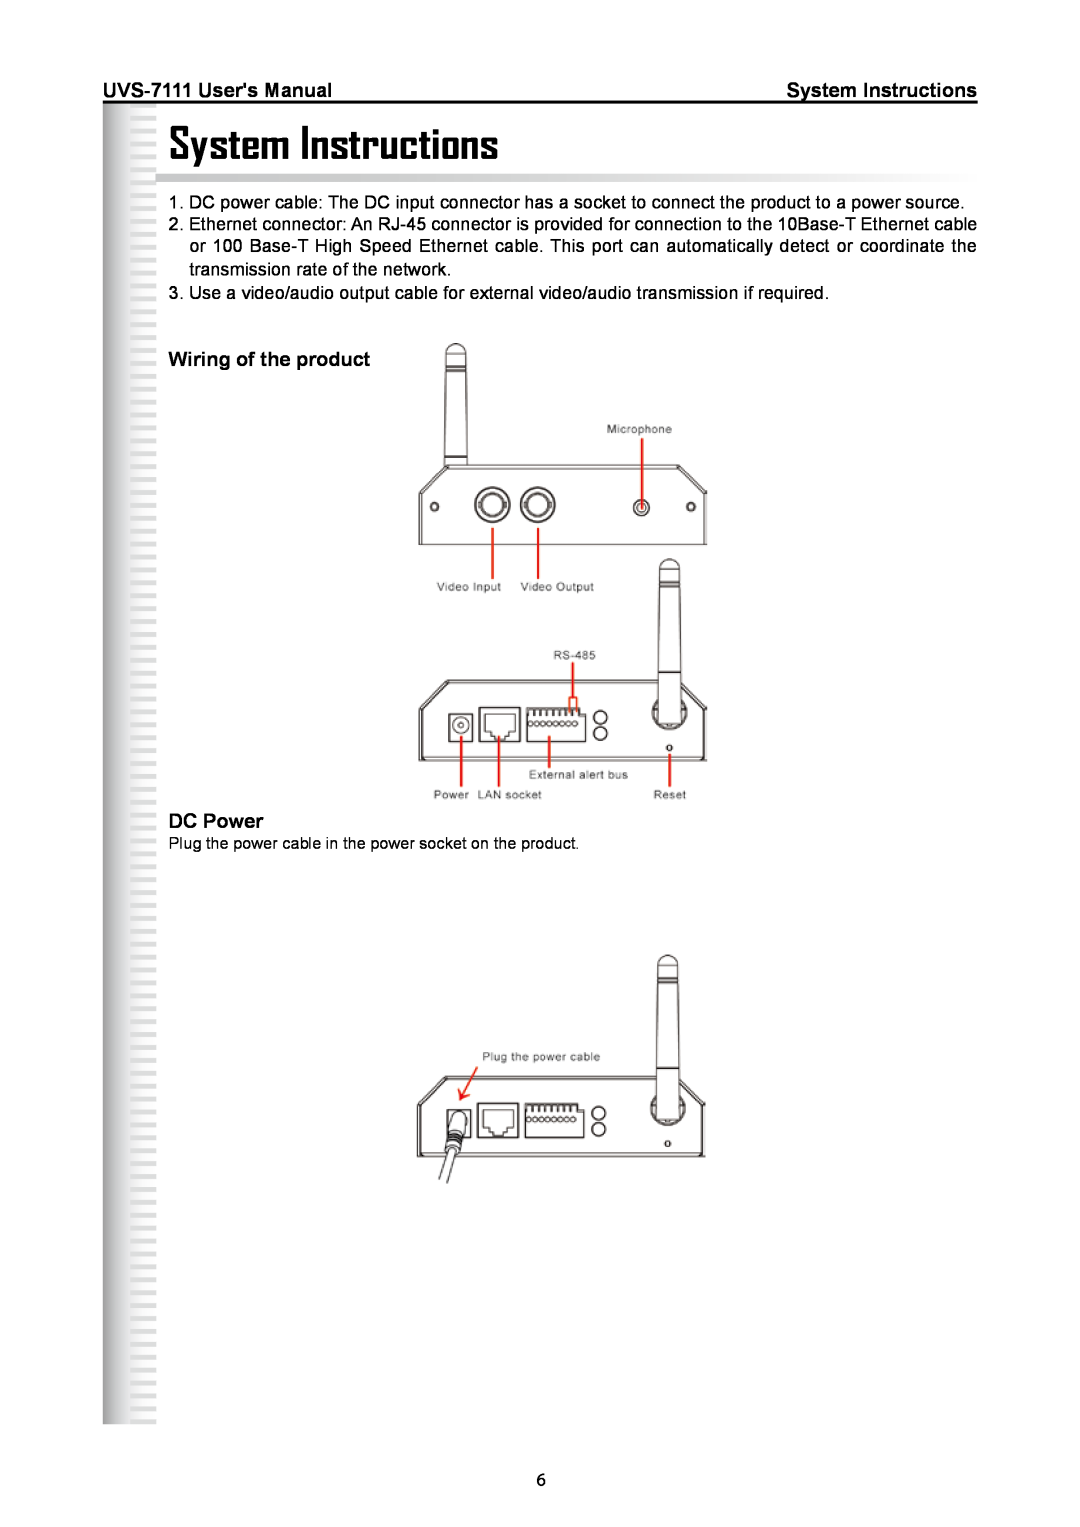 Active Thermal Management manual System Instructions, Wiring of the product DC Power, UVS-7111 Users Manual 